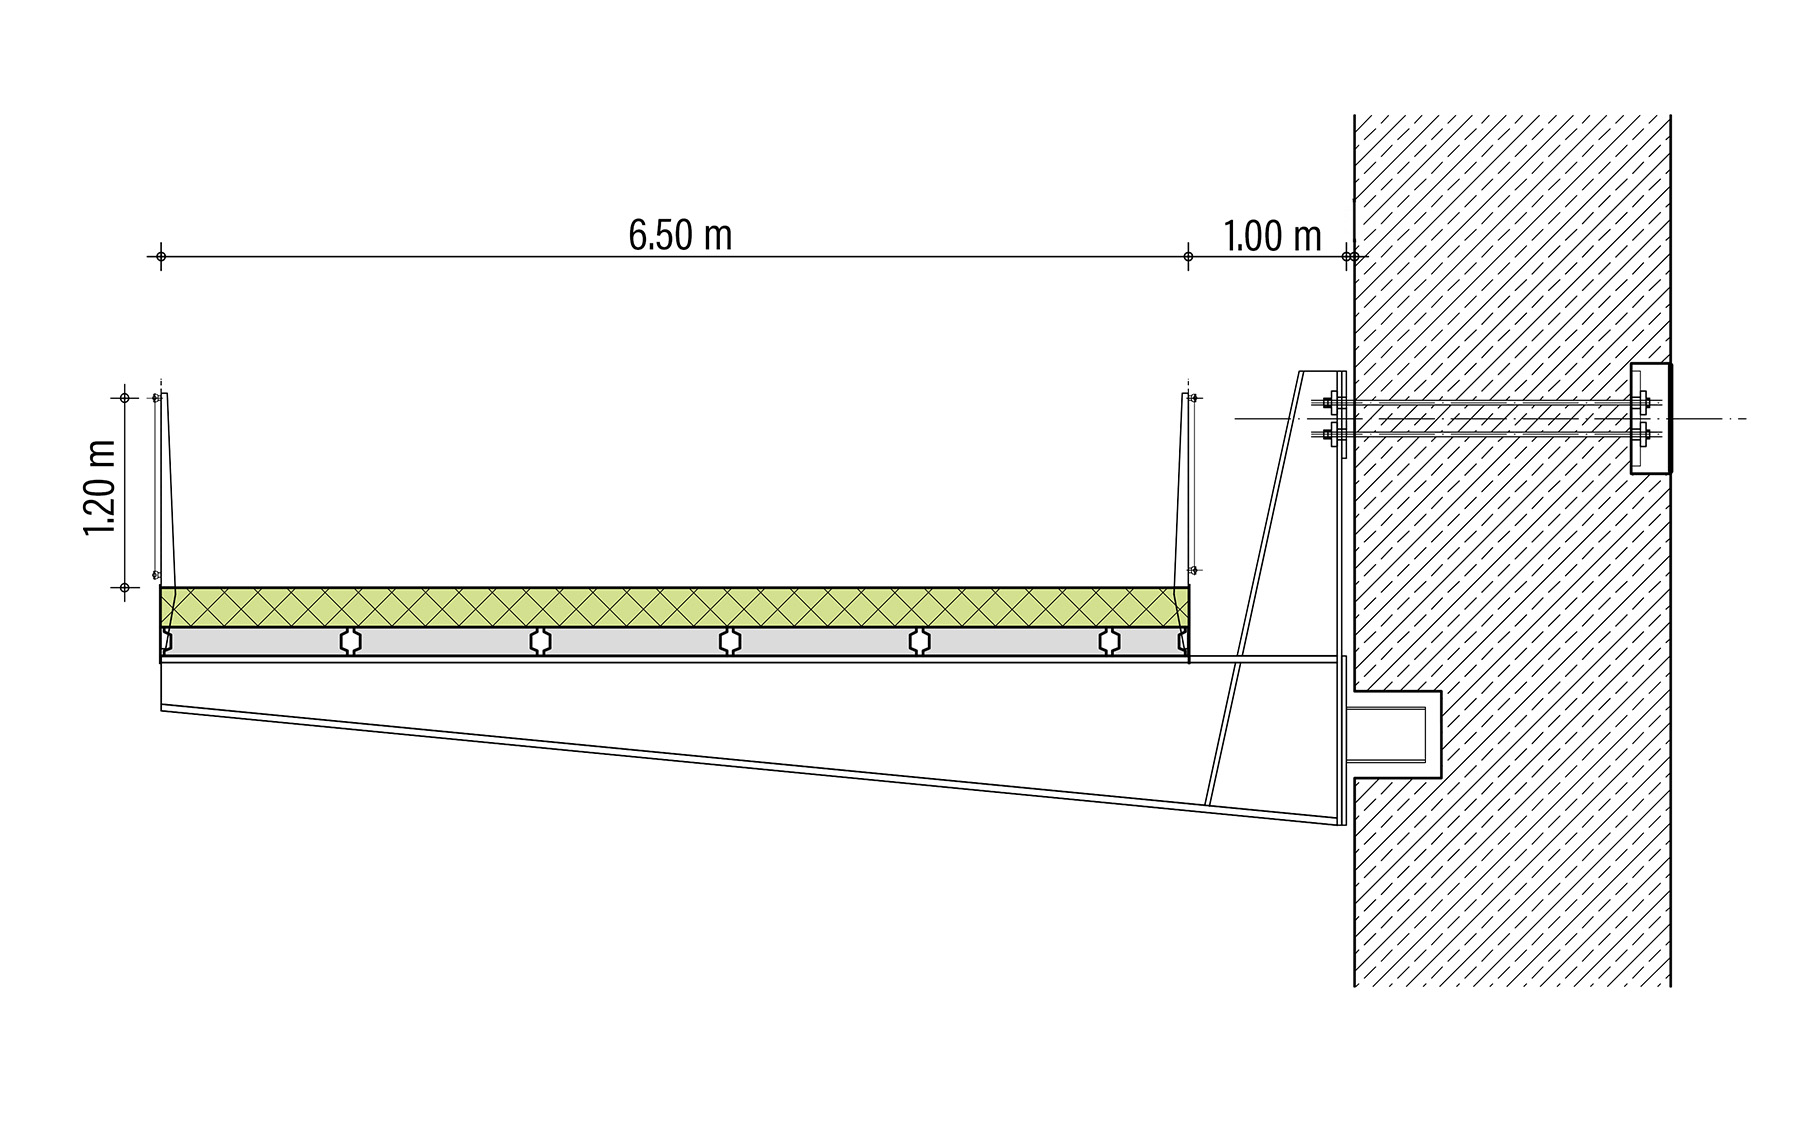 The drawing shows a detail of how the ramp is attached to the concrete walls. 